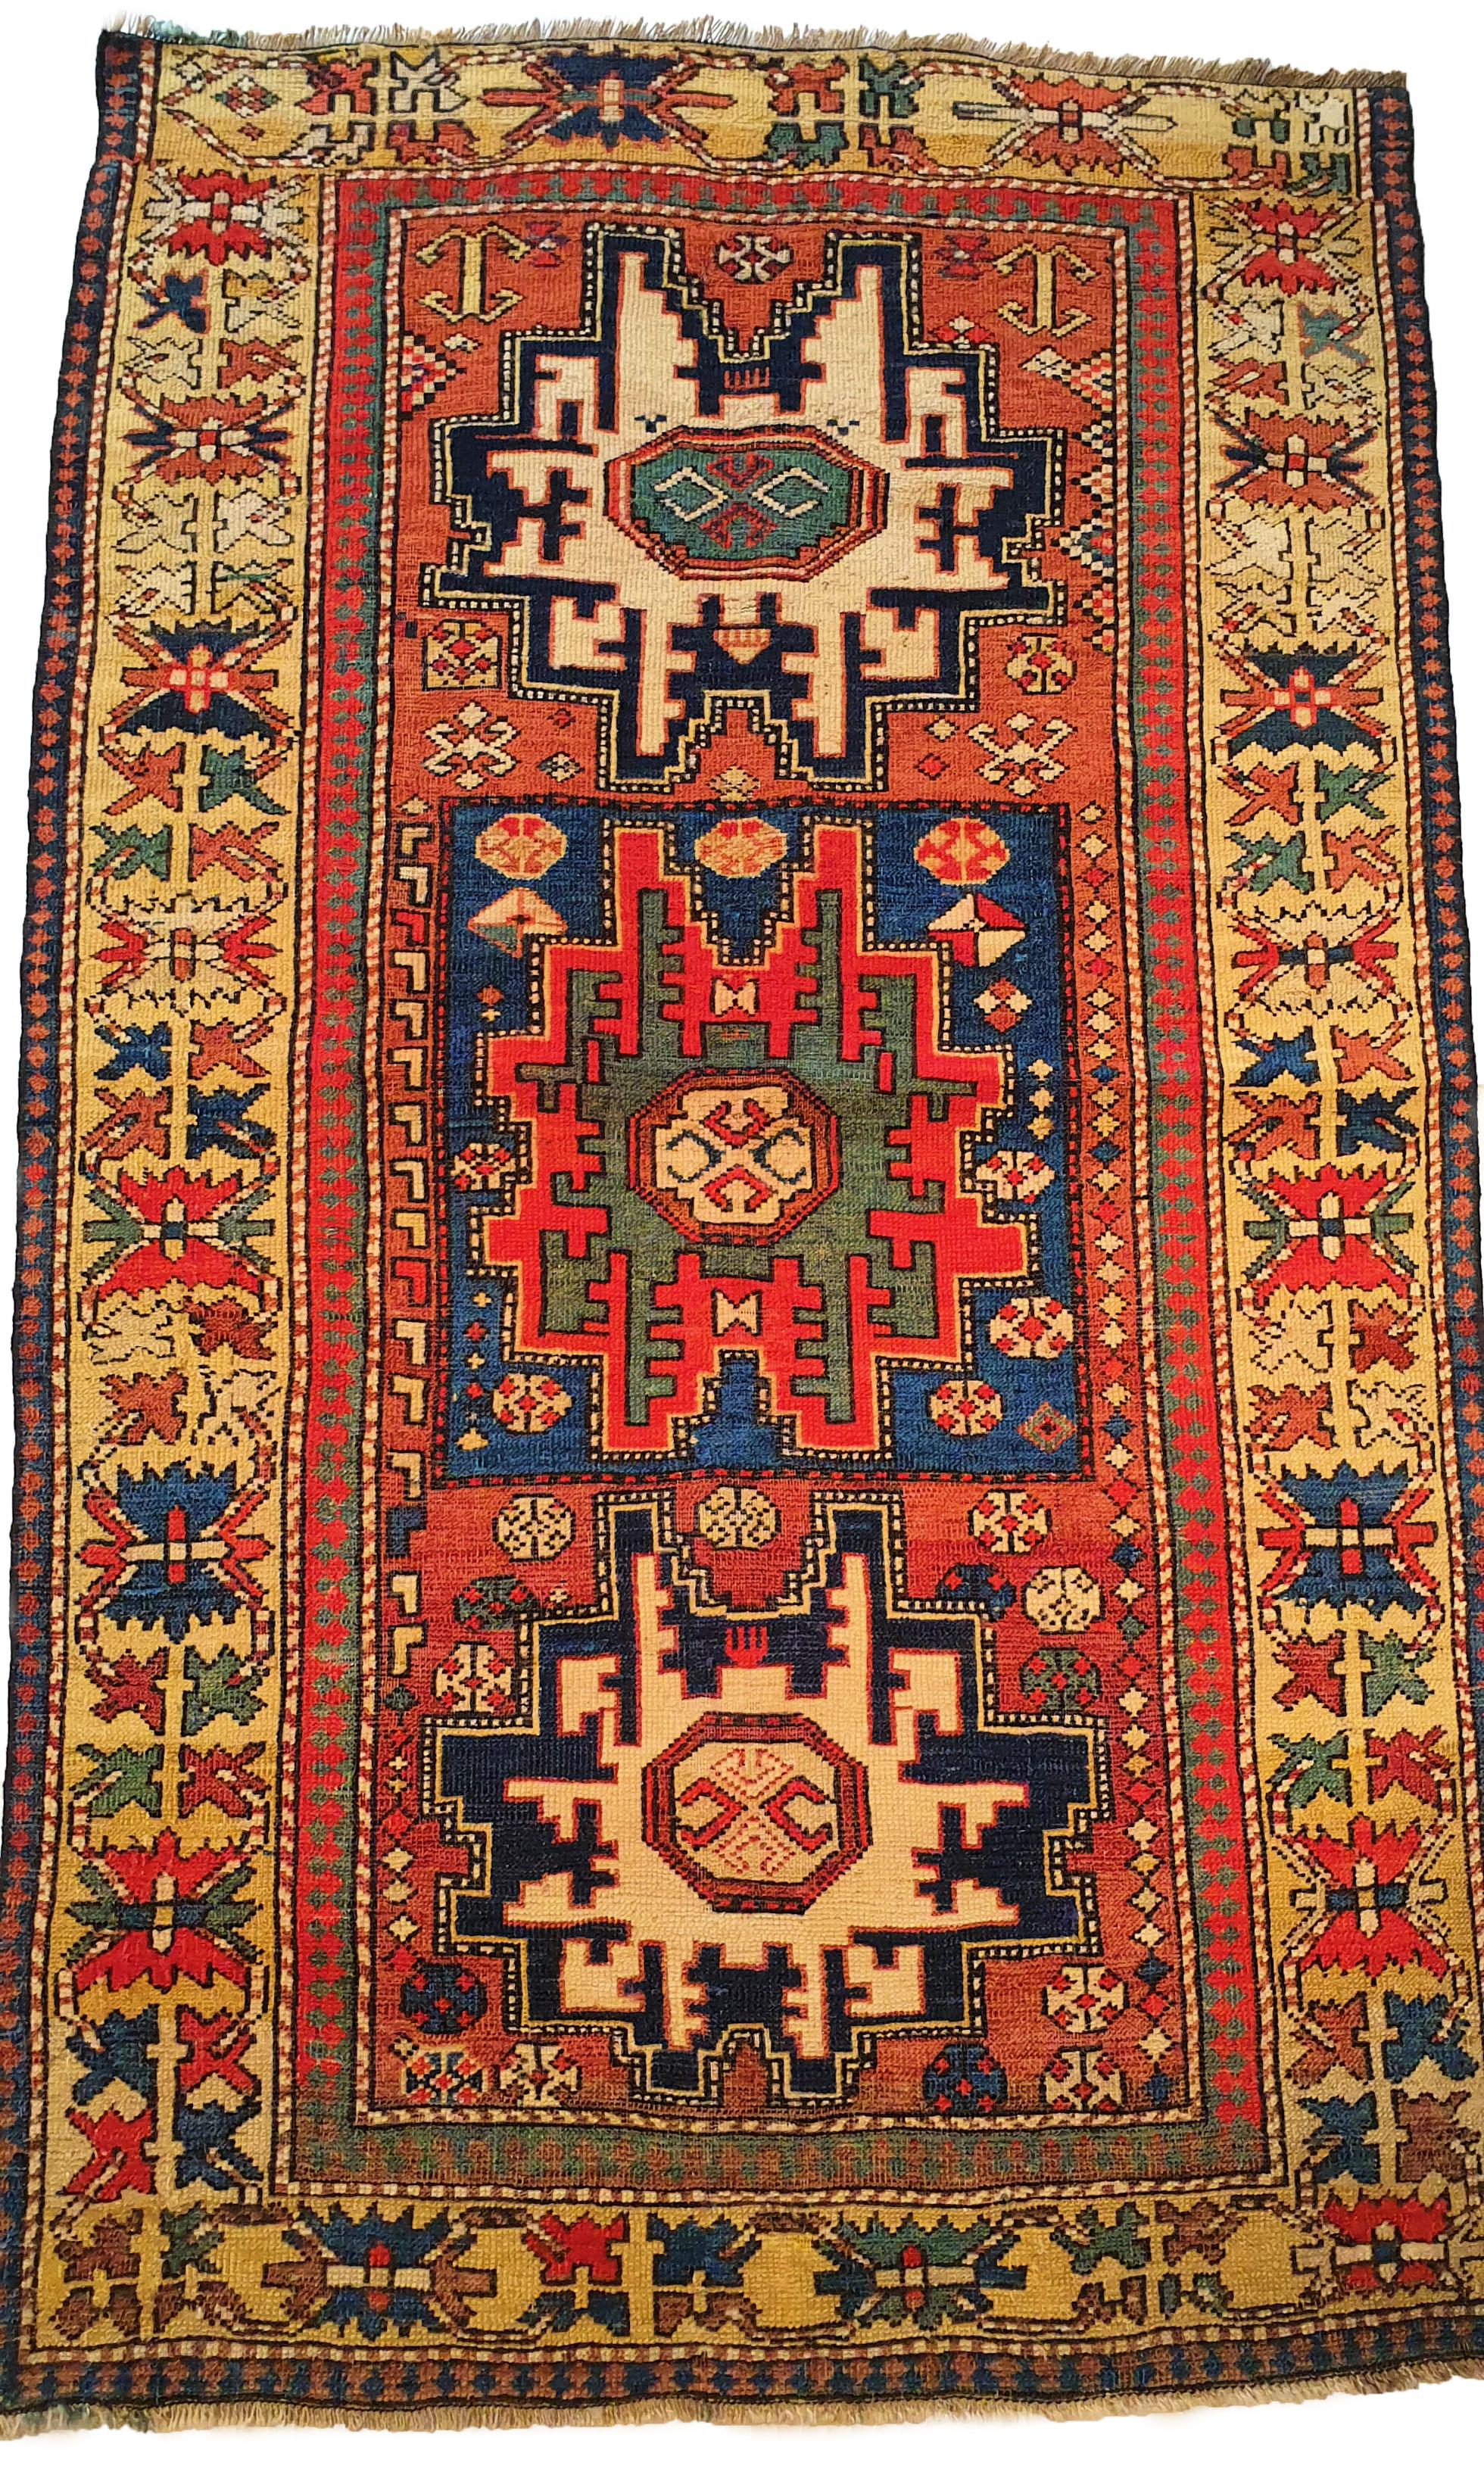 Hand knotted carpet in Russia at the beginning of the 19th century.
High quality, beautiful graphics and remarkable finesse.
.
Perfect state of preservation.

Measures: 150 x 90 cm

Tapis noué à la main en Russie au début du 19ème siècle.
De grande